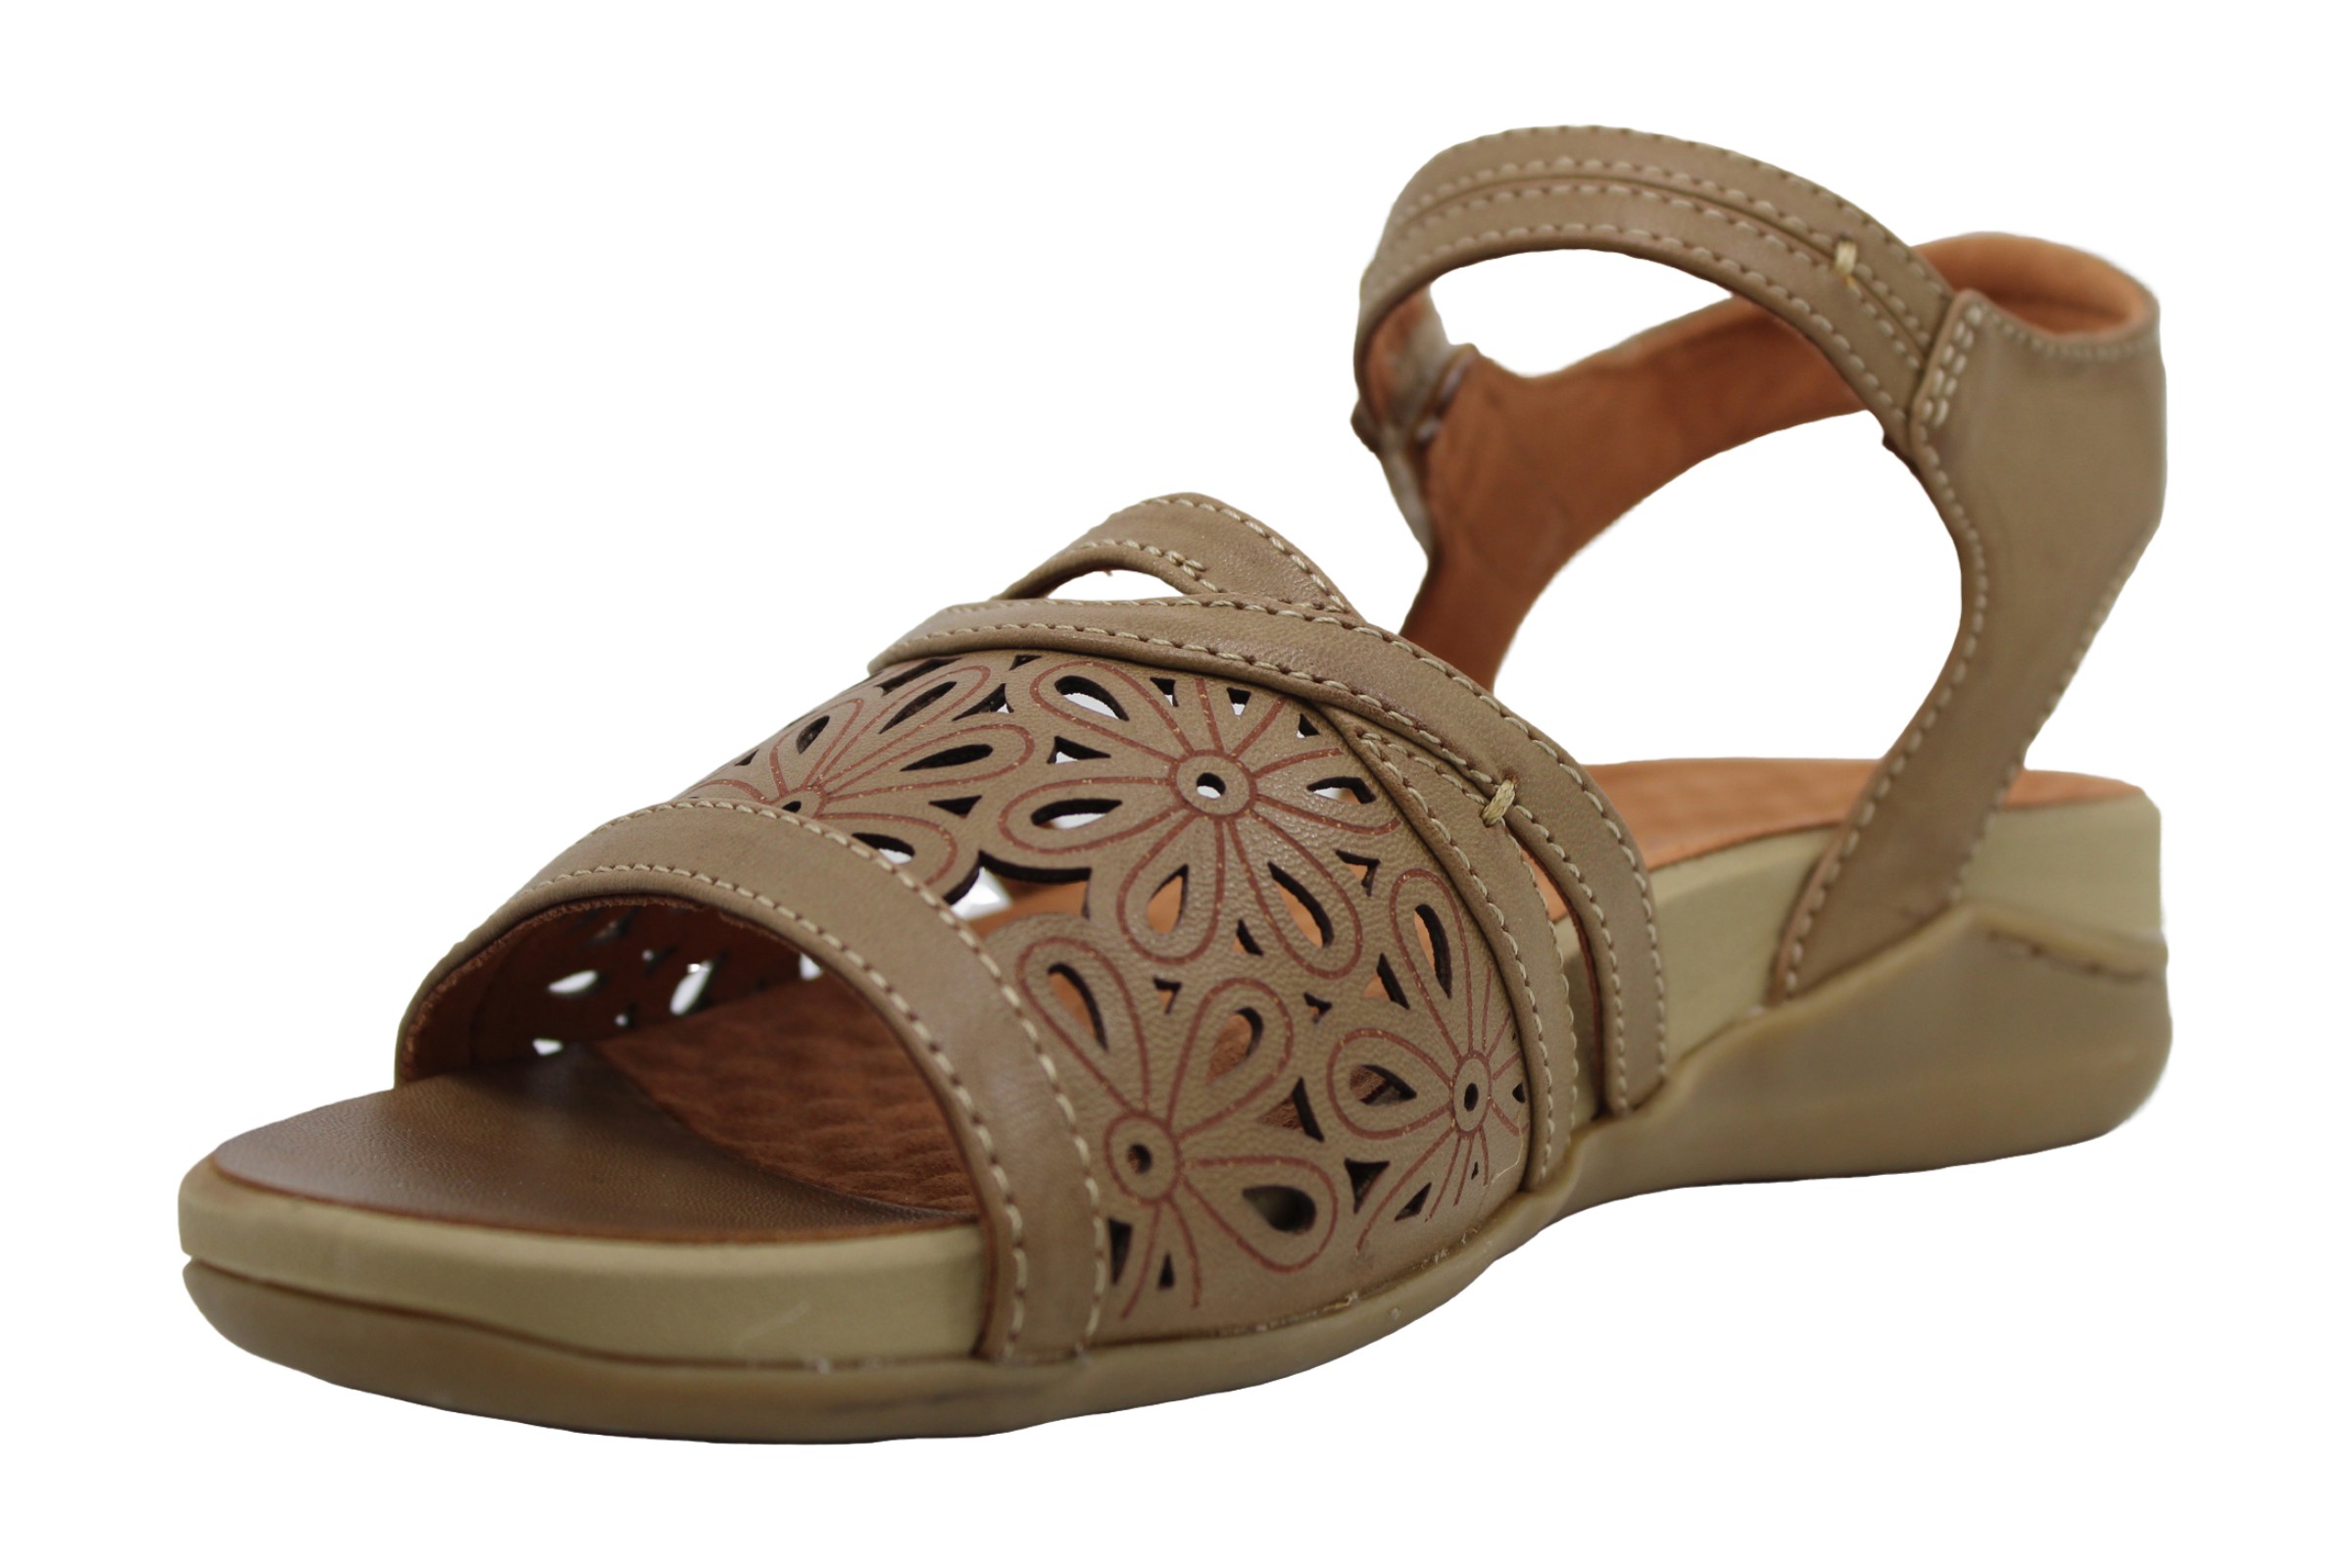 Bare Traps Womens Nolie Sandals Leather Open Toe Casual Ankle Almond Size 100 825443338073 Ebay